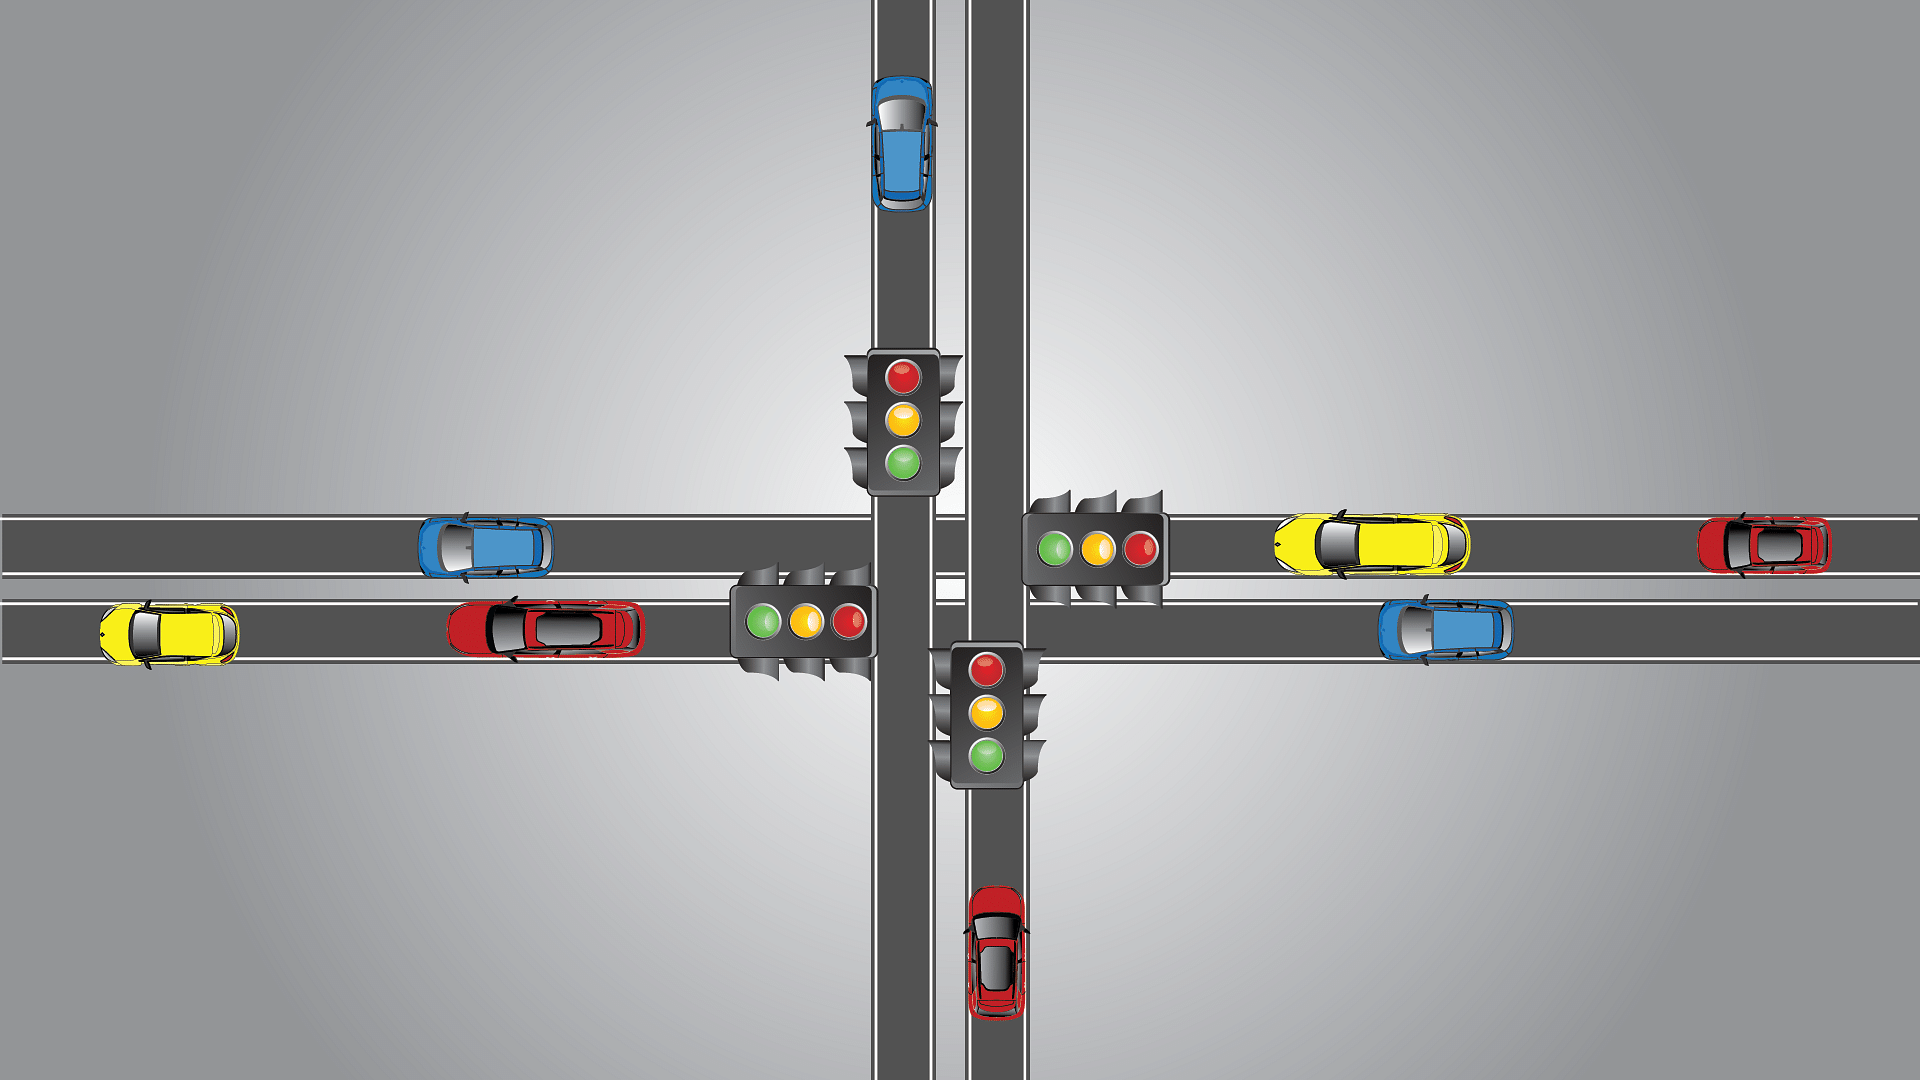 Can We Get Rid Of Those Pesky Traffic Signals?